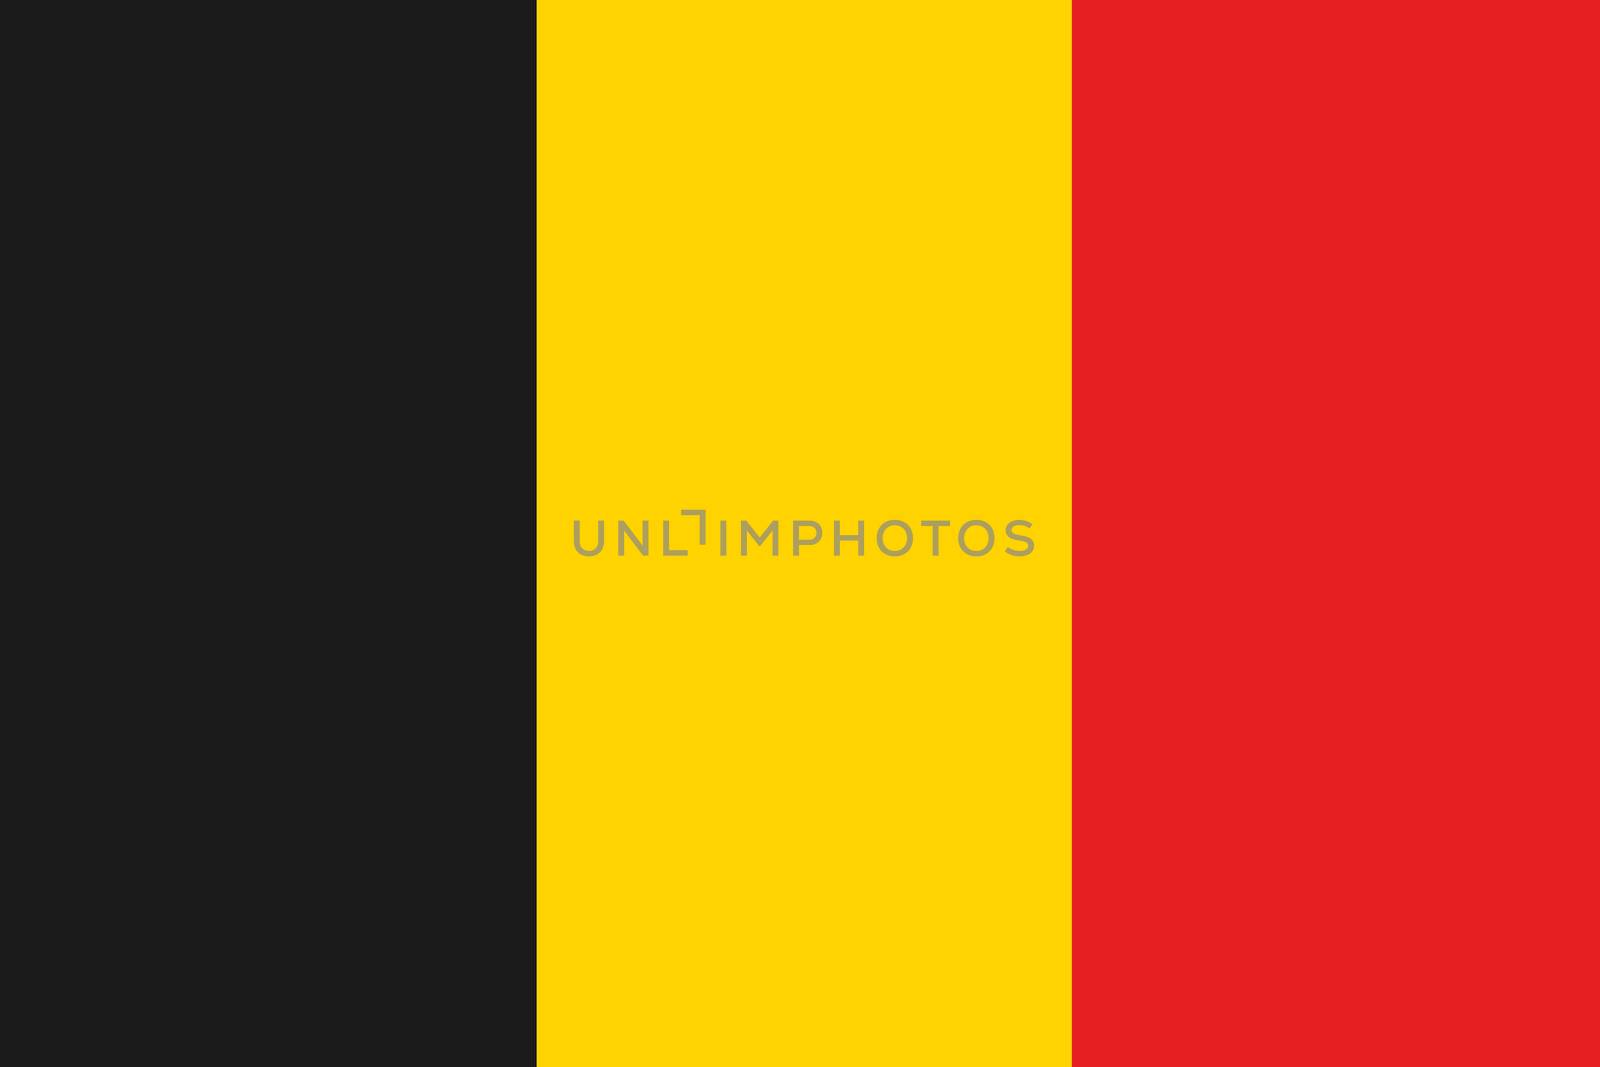 An illustration of the flag of Belgium